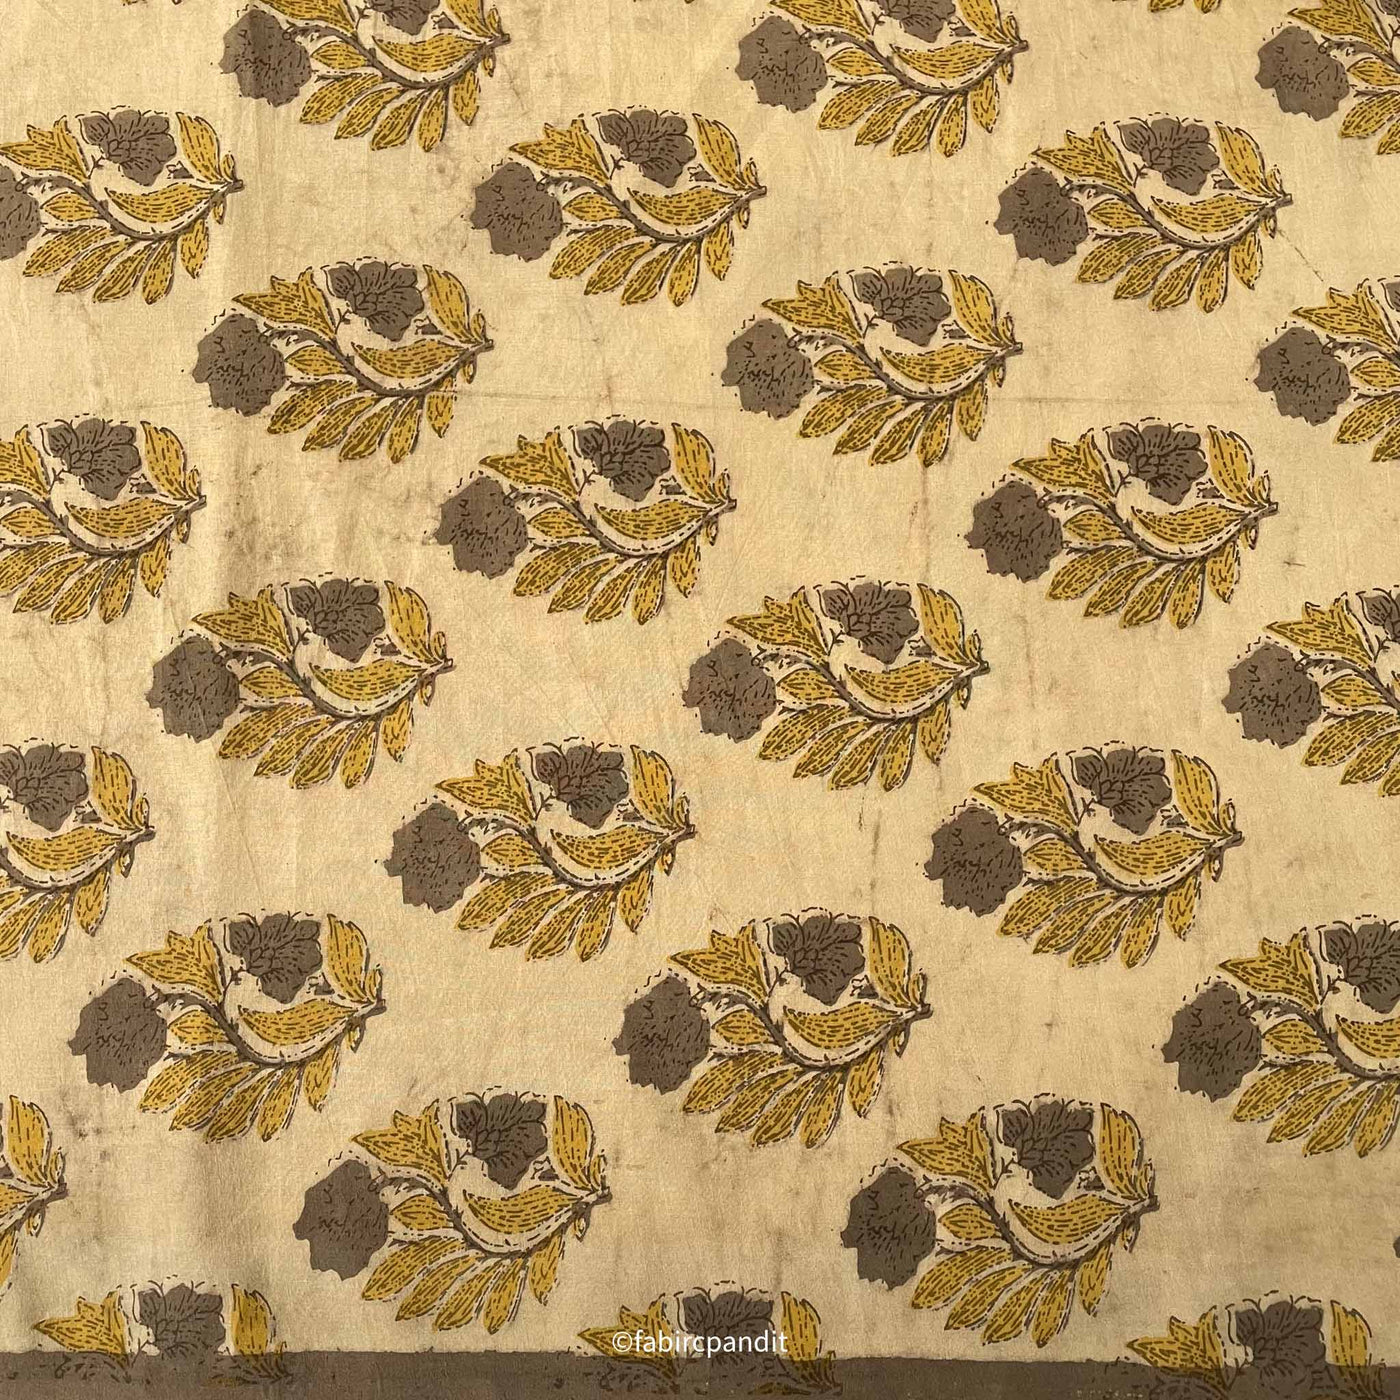 Fabric Pandit Cut Piece (CUT PIECE) Ocher and Brown Flower Bunch Hand Block Printed Pure Cotton Fabric (Width 43 inches)